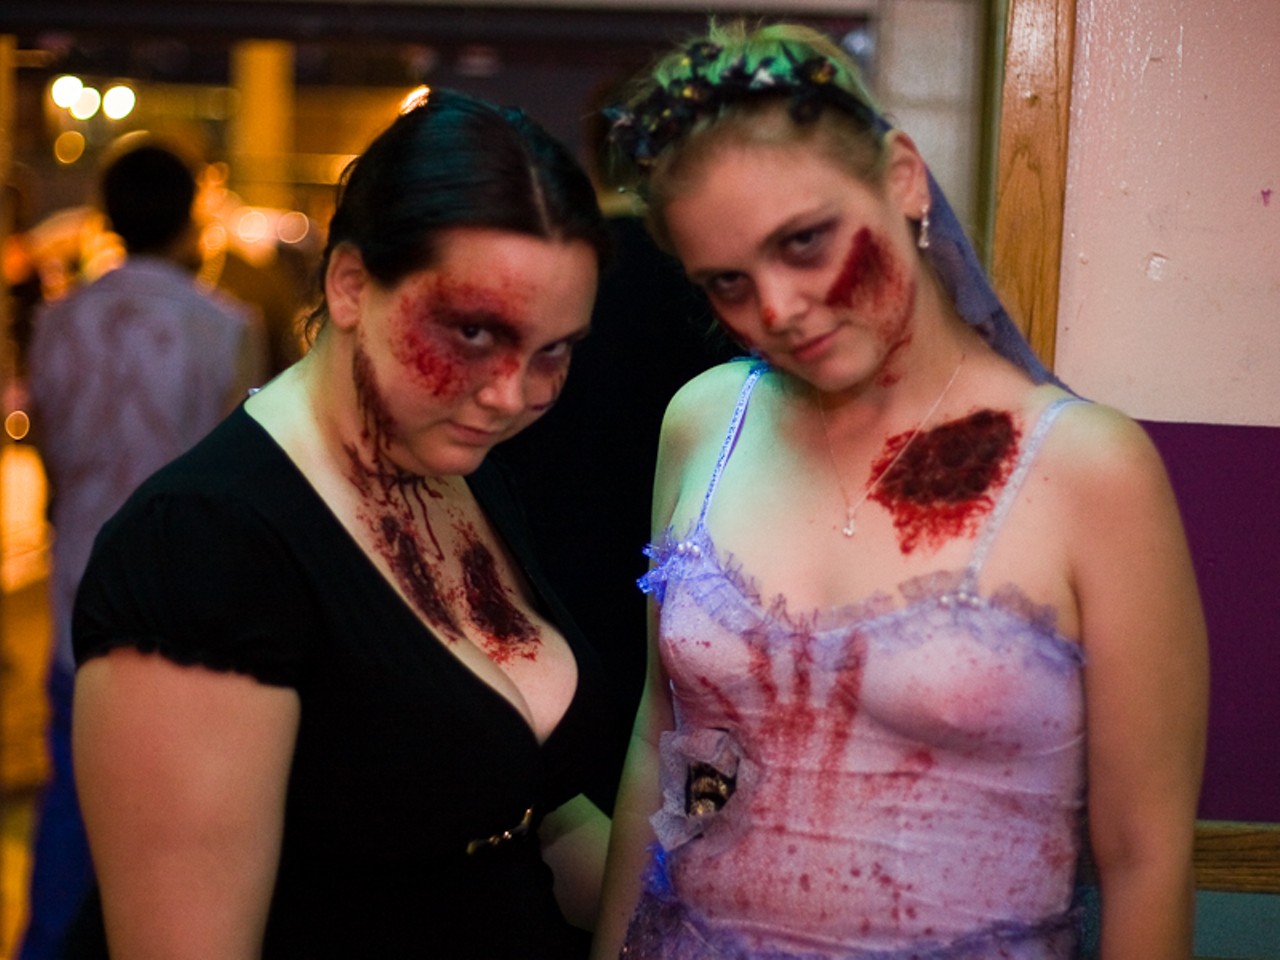 Ever wonder what haunted house employees do the other 11 months of the year? So did we. More photos.